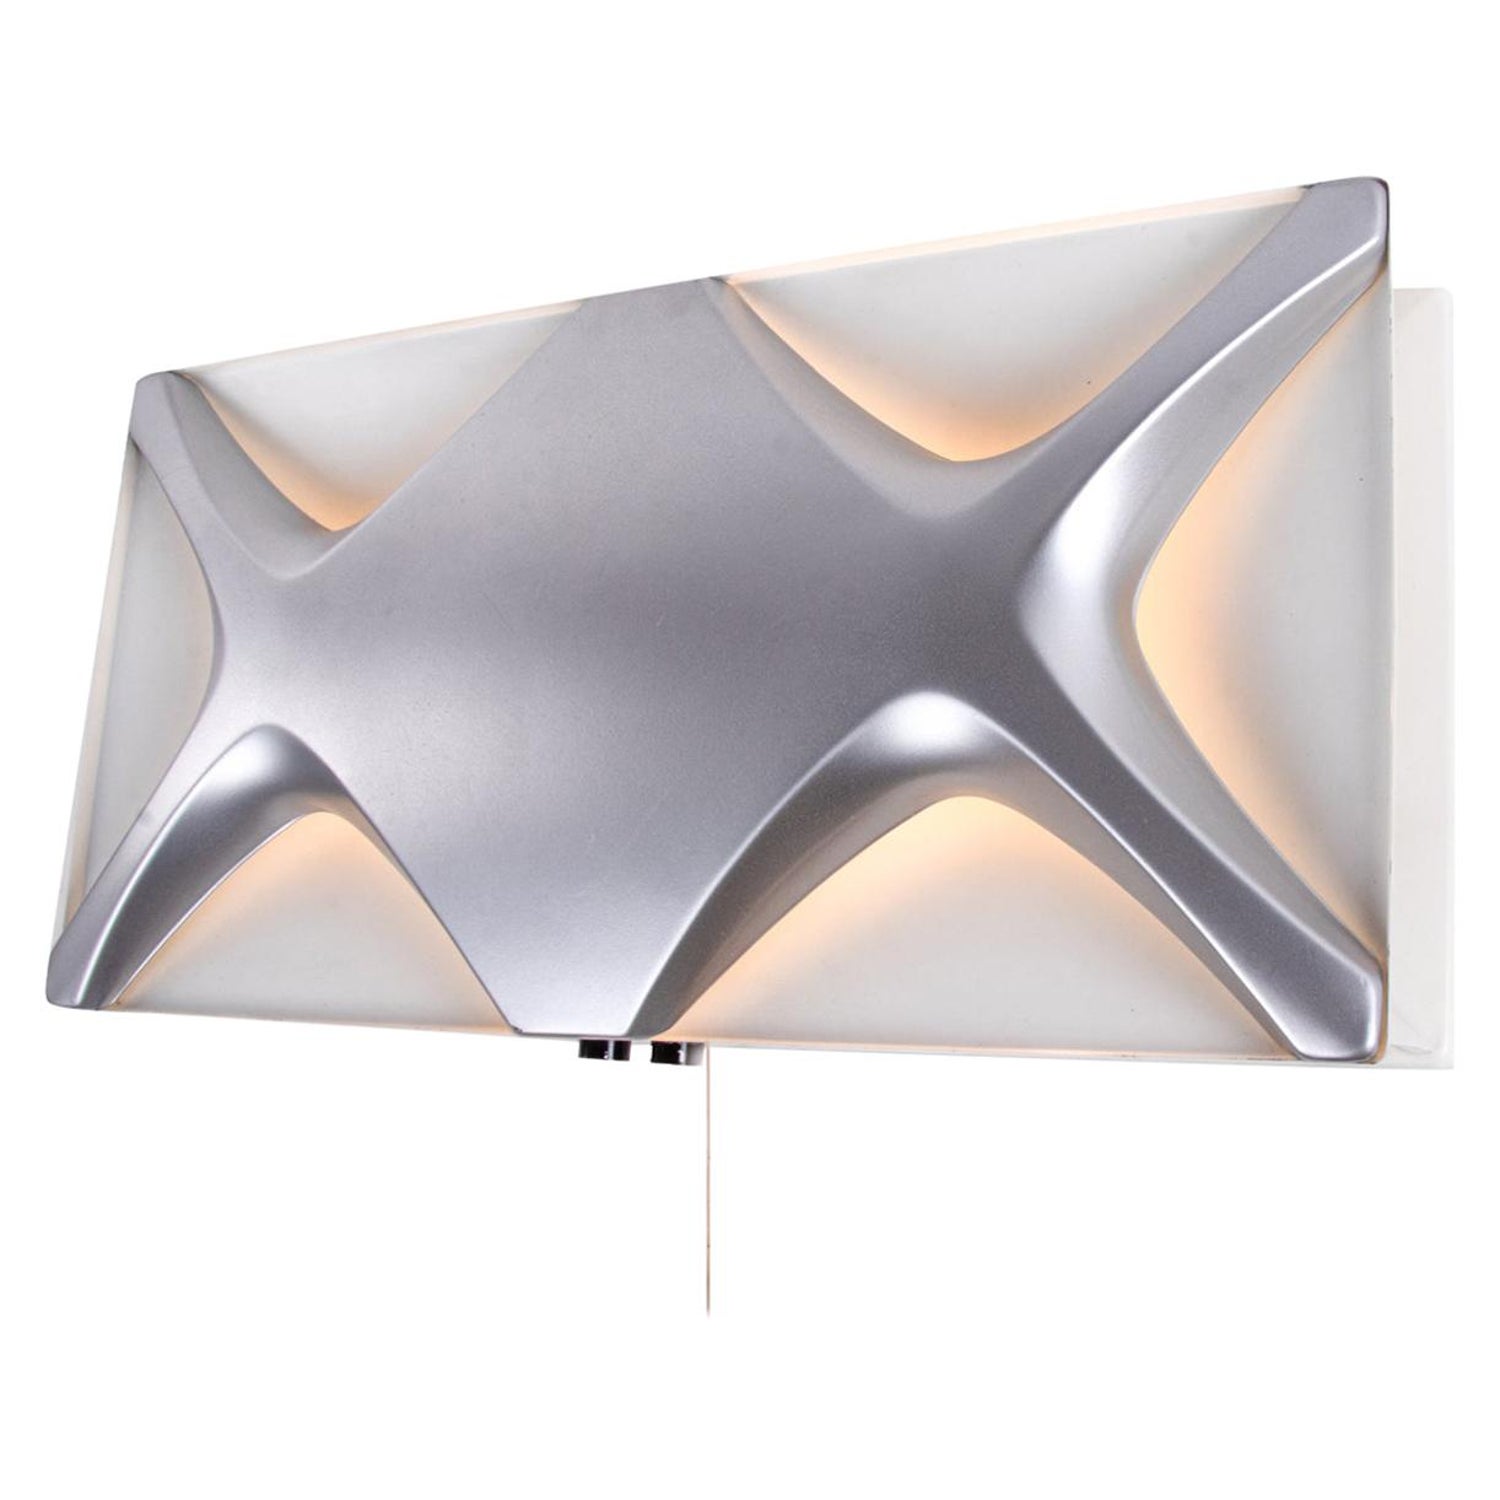 Large Oyster Light Panel by Dieter Witte and Rolf Krüger for Staff, 1968  For Sale at 1stDibs